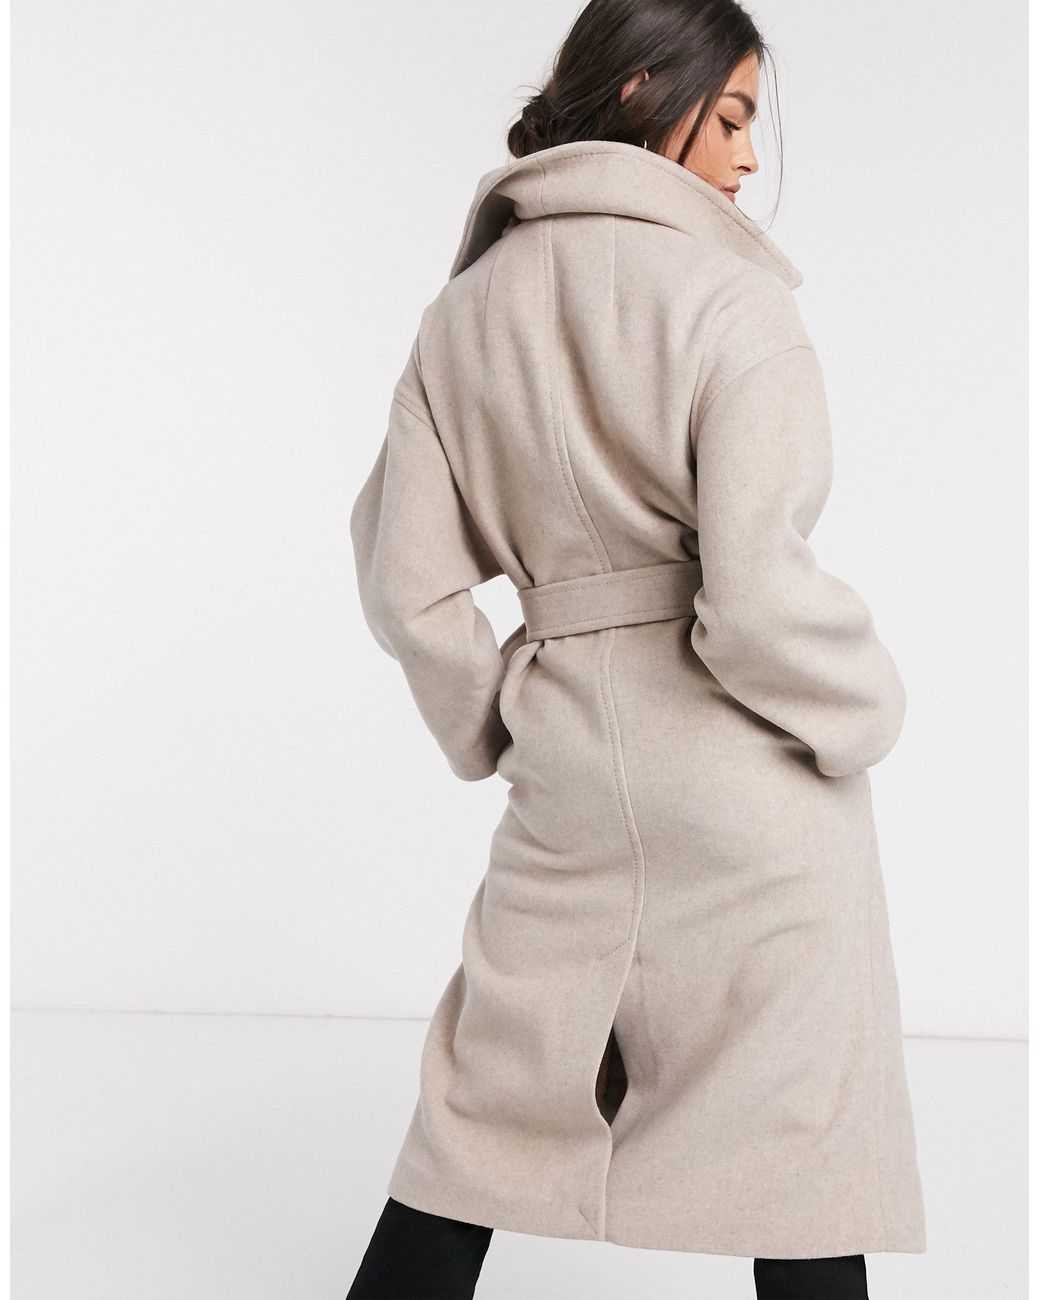 & Other Stories Wool Belted Coat in Natural | Lyst Canada